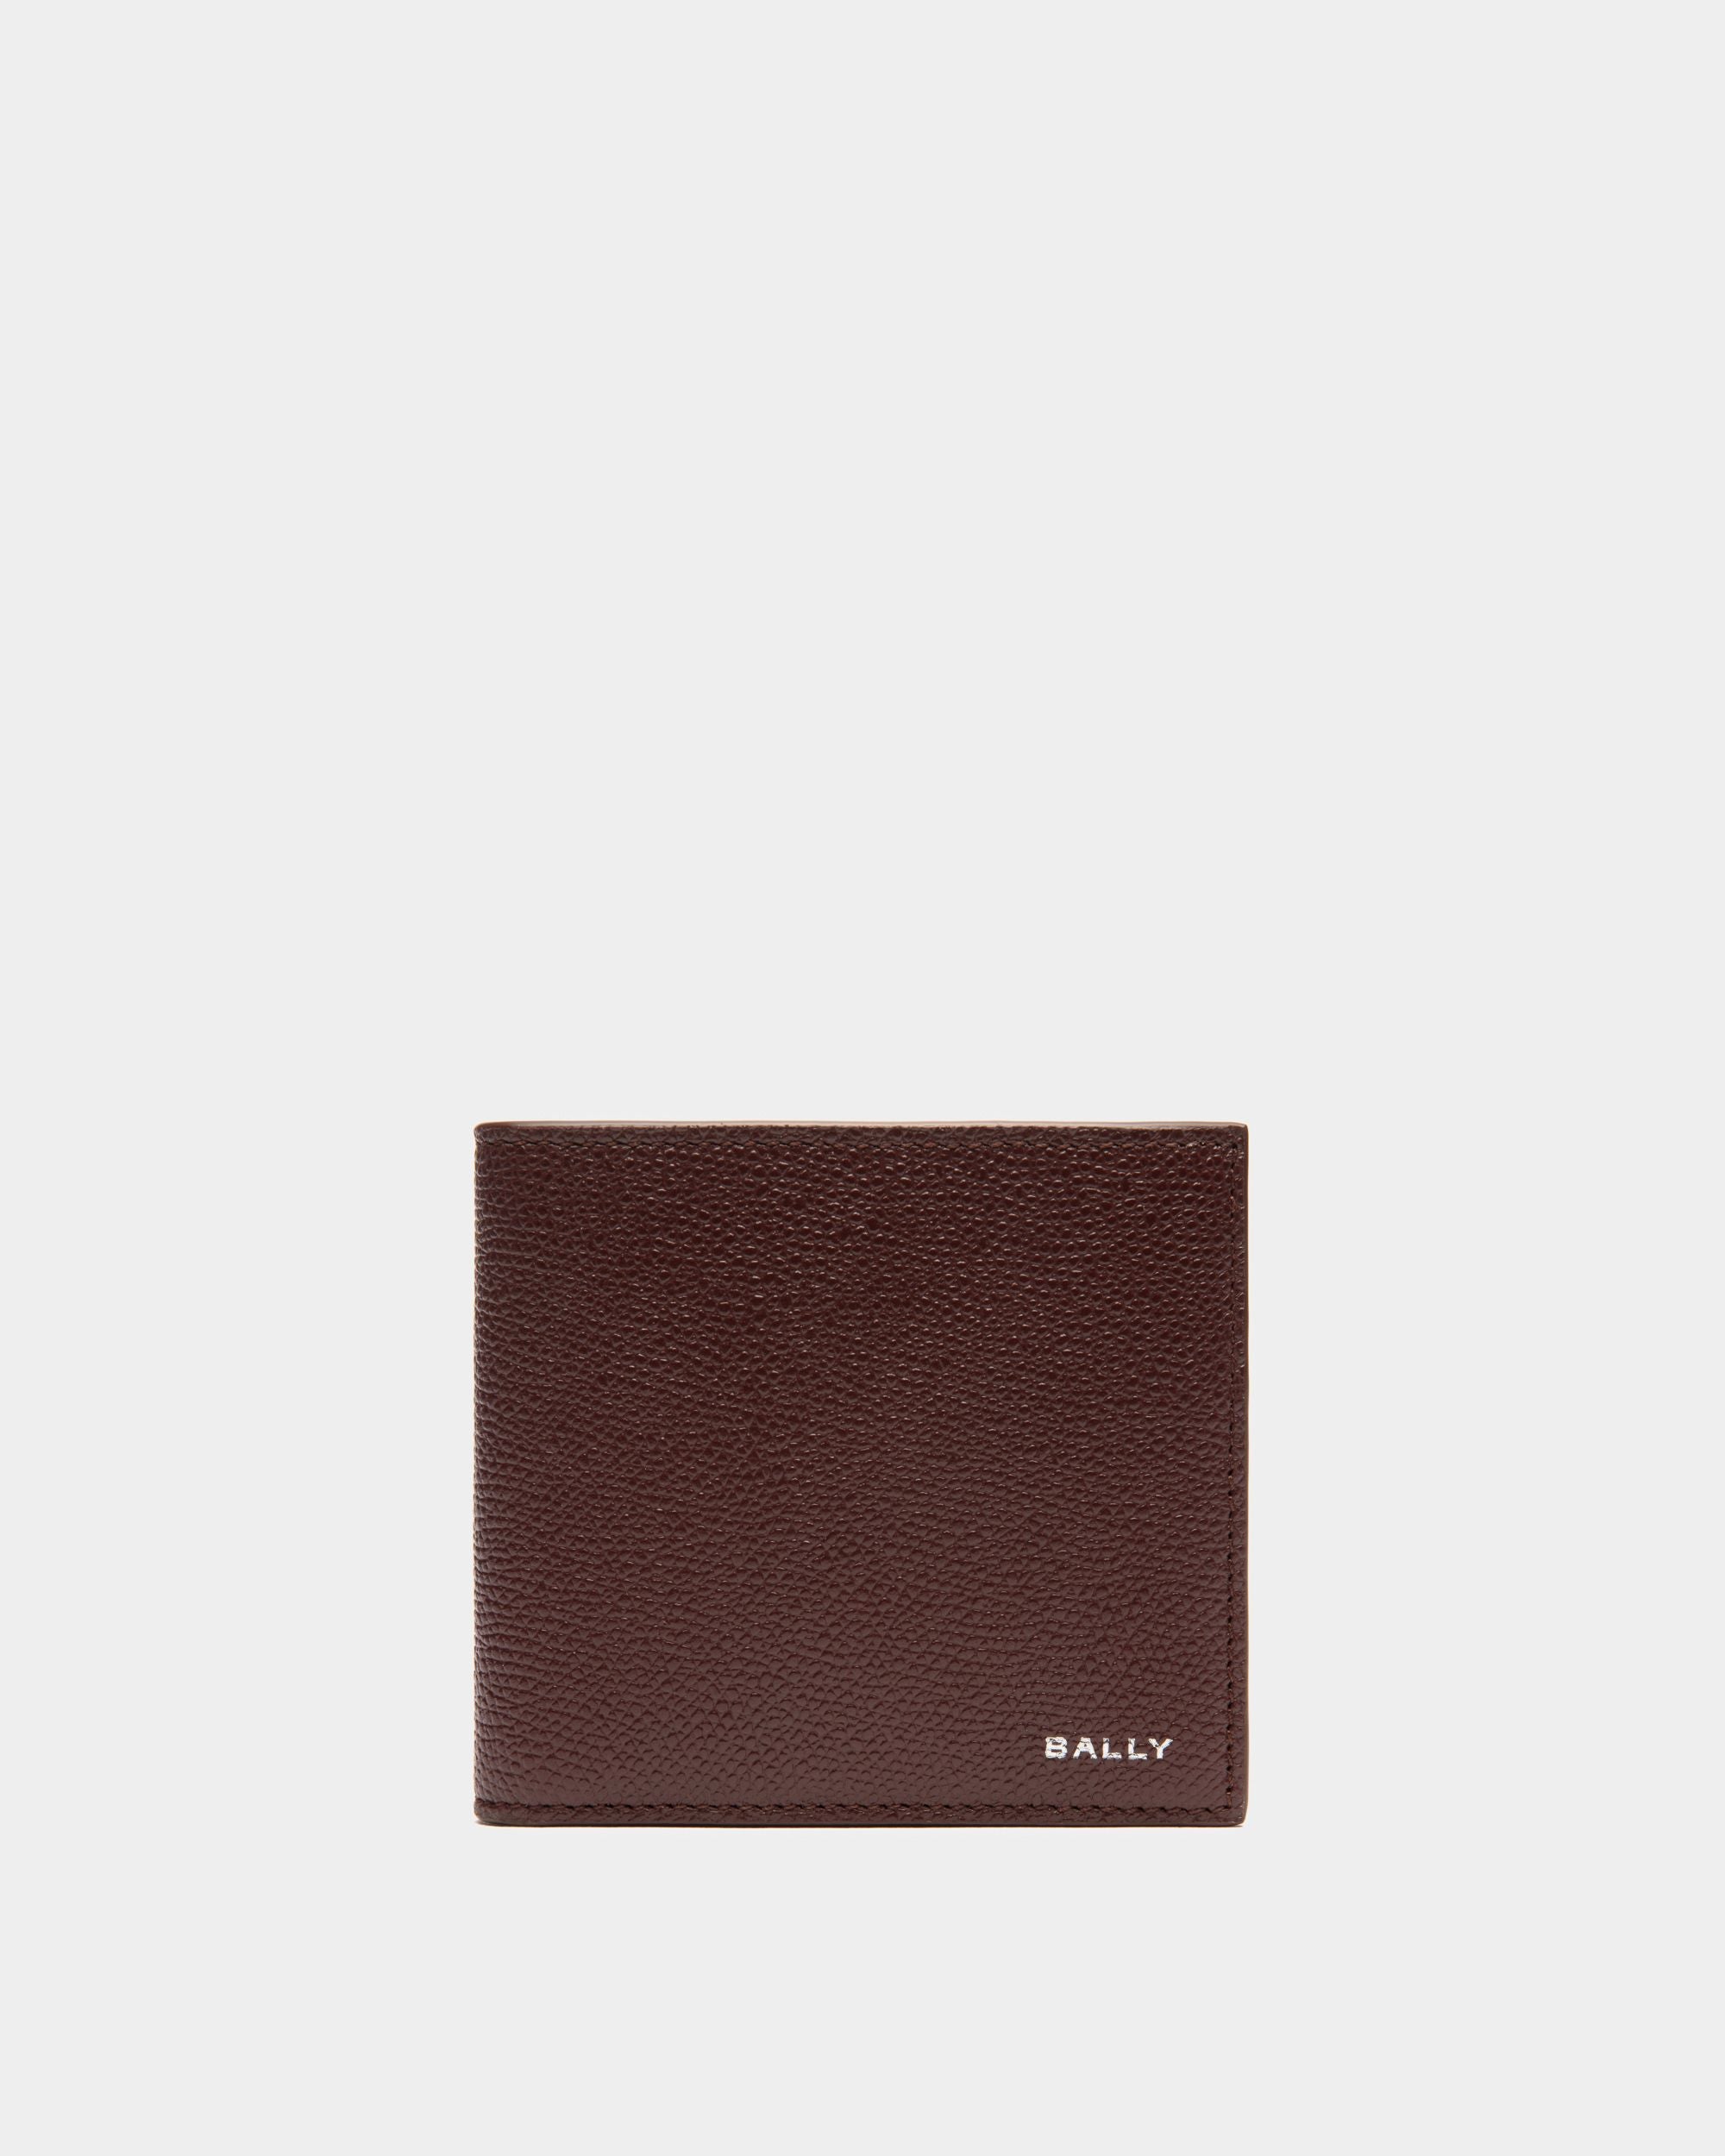 Flag | Men's Bifold Wallet in Chestnut Brown Grained Leather | Bally | Still Life Front